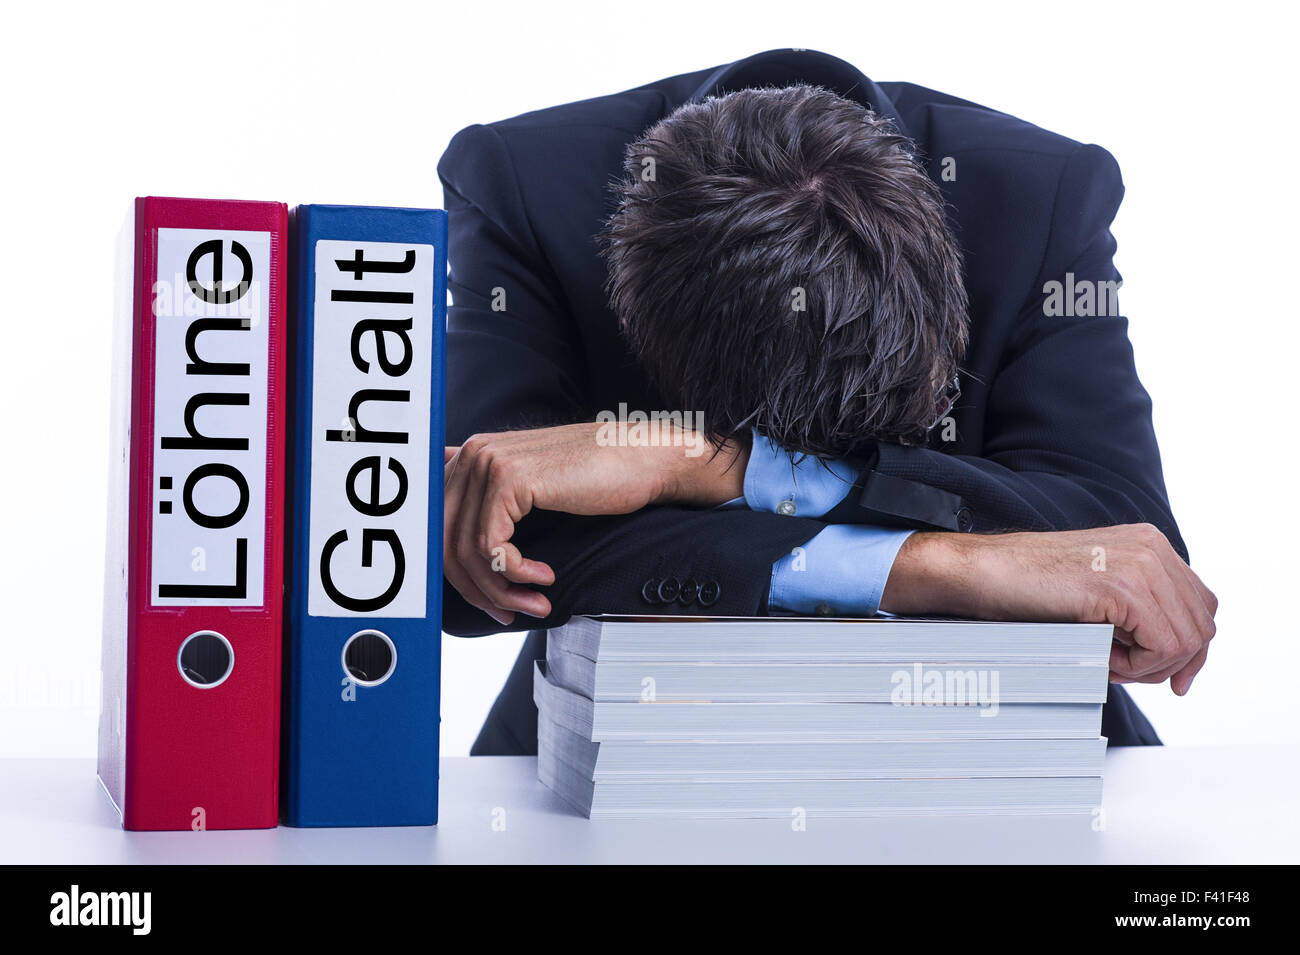 Exhausted businessman at desk Stock Photo